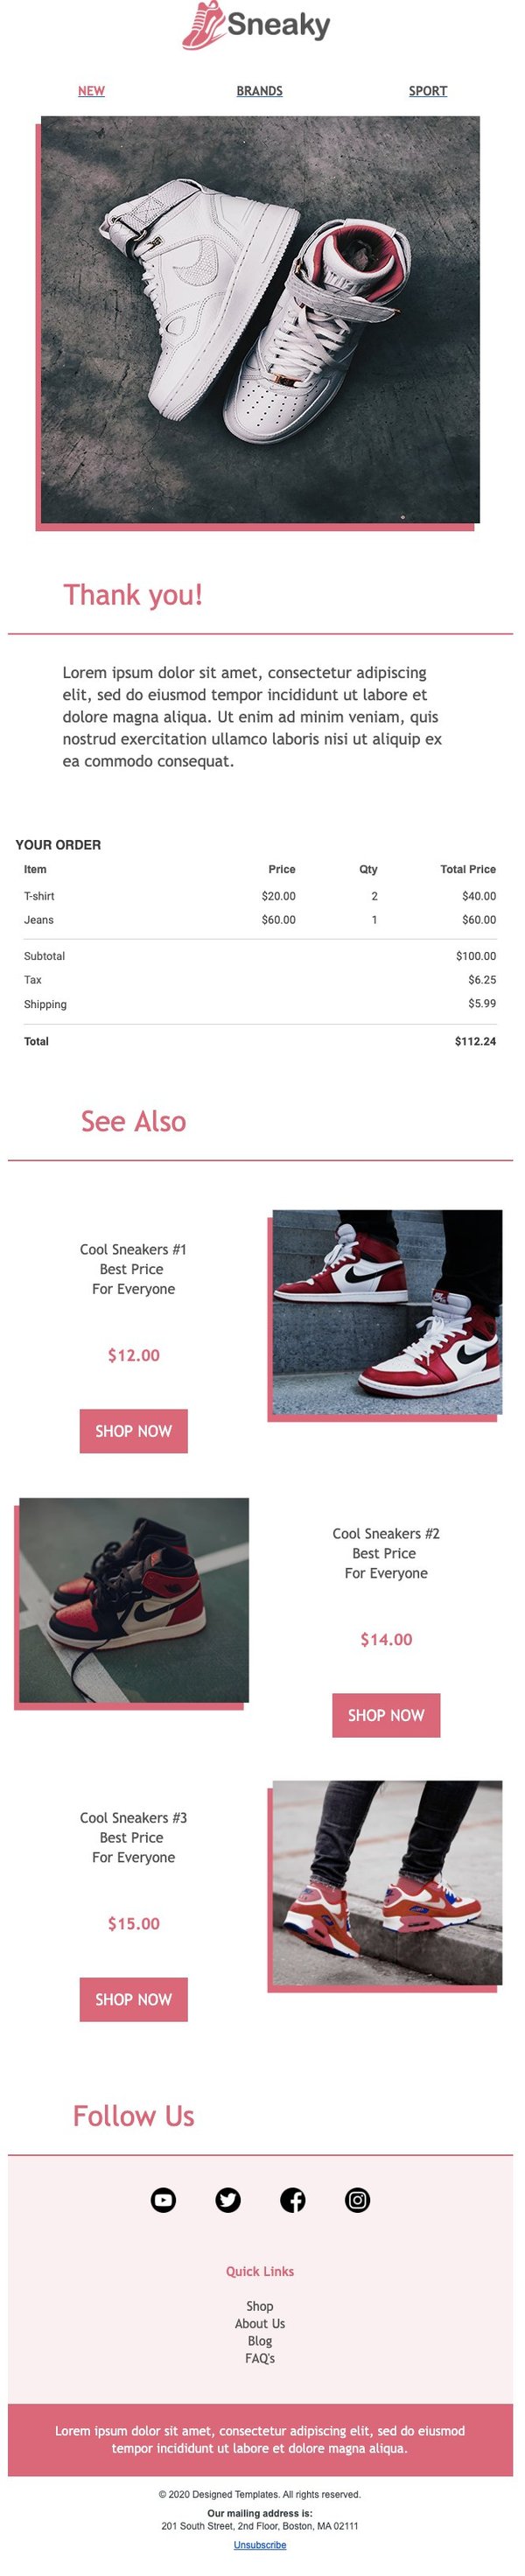 23 Free Ecommerce Email Templates for Your Next Campaign